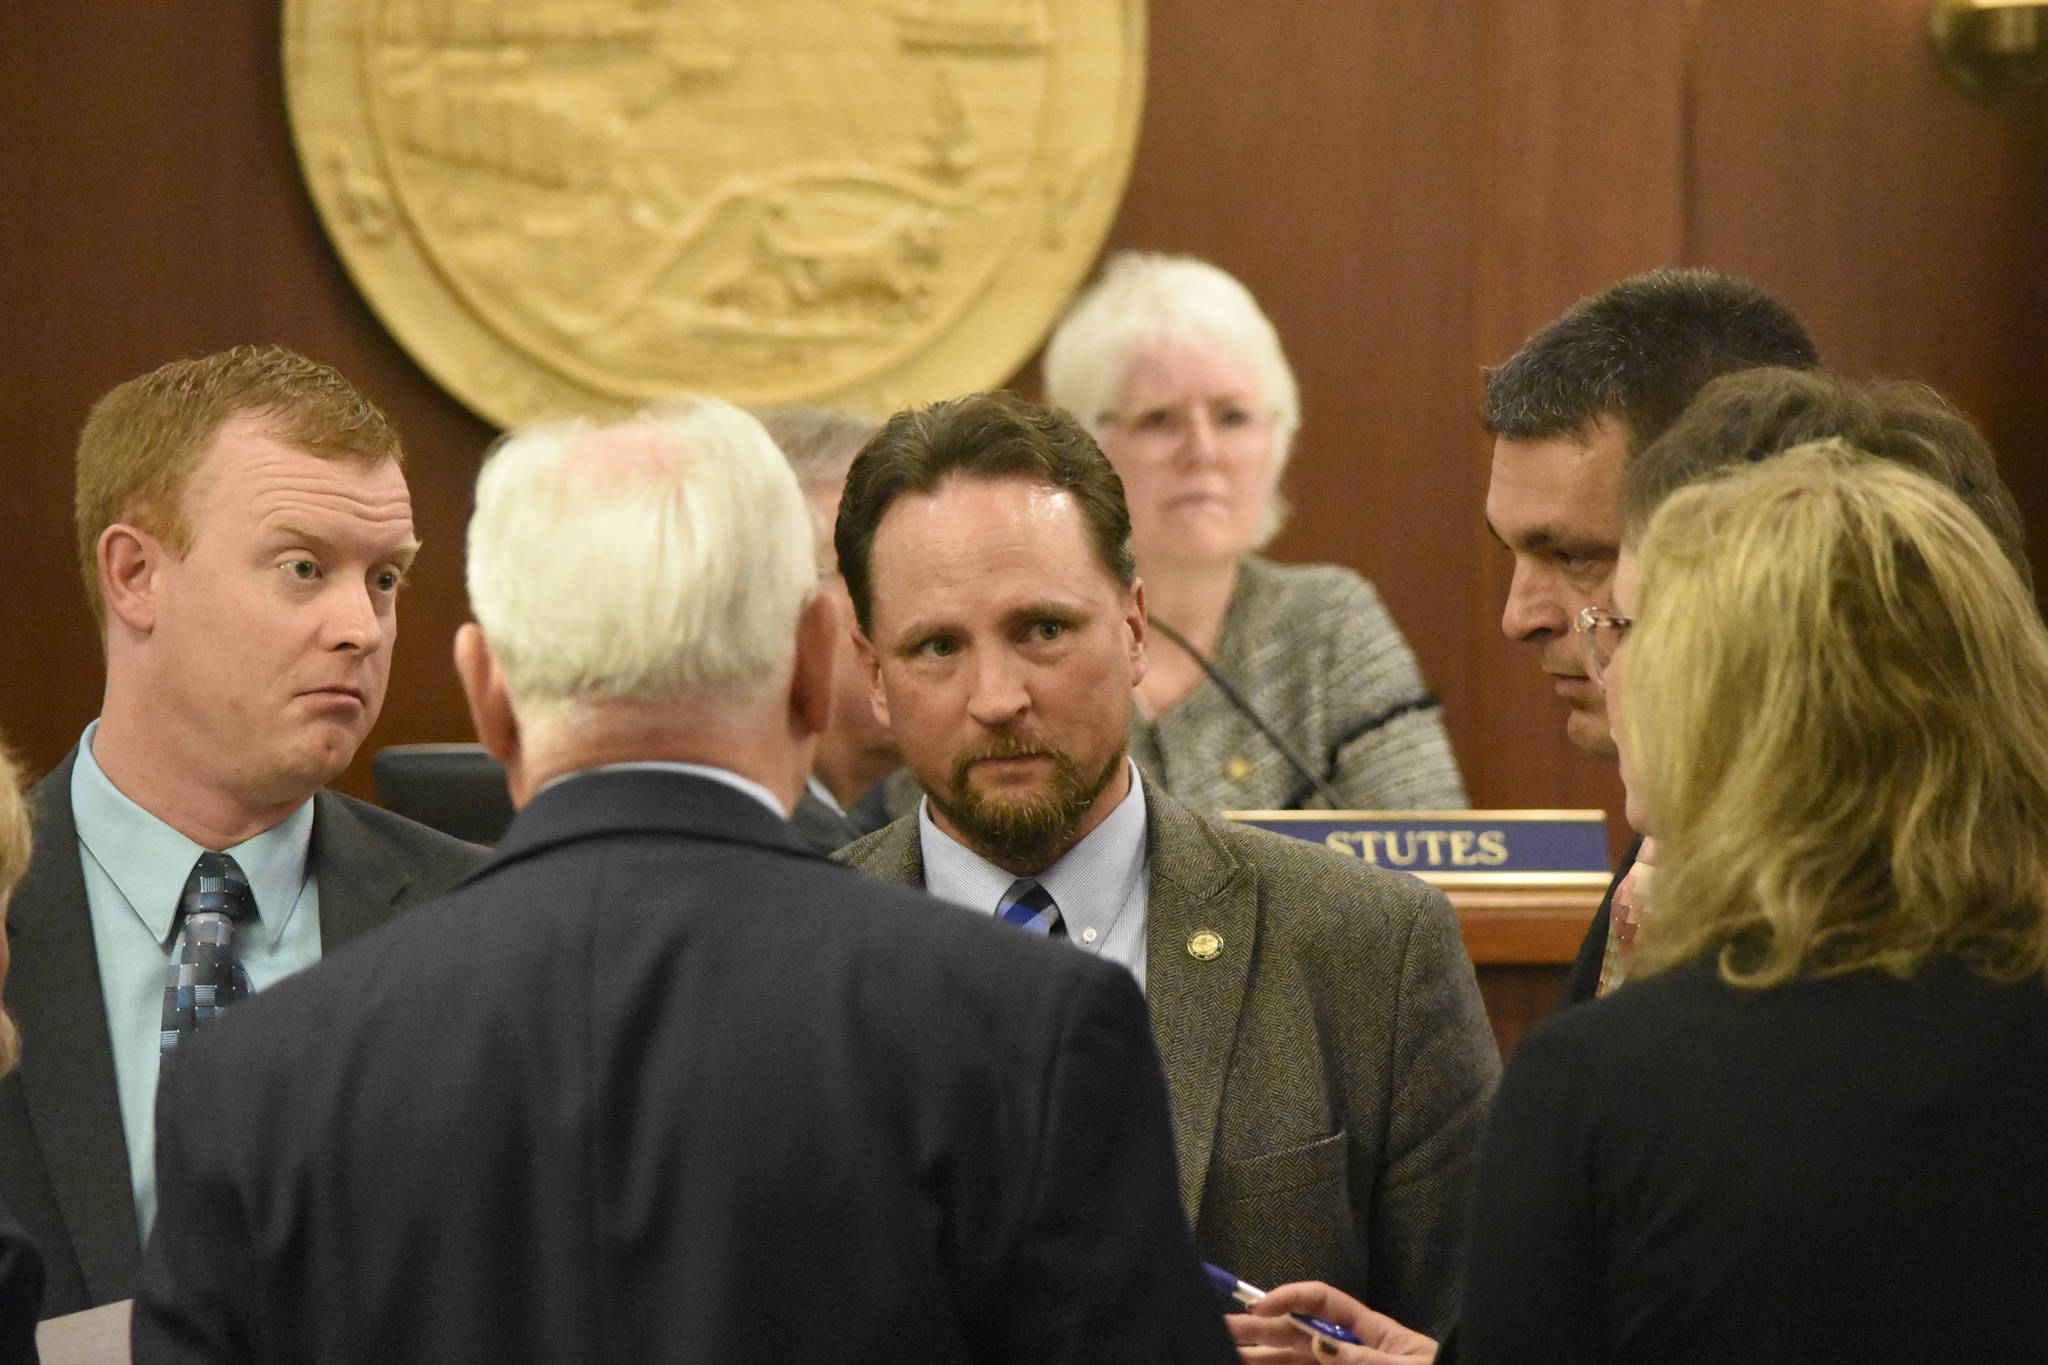 Members of the House Republican Minority Caucus talk amongst themselves during an at ease on the floor of the Alaska House of Representatives on Monday, June 28, 2021. House members reached a deal on an operating budget and avoided a government shutdown but members of the minority said they had been repeatedly pushed out of the process. (Peter Segall / Juneau Empire)